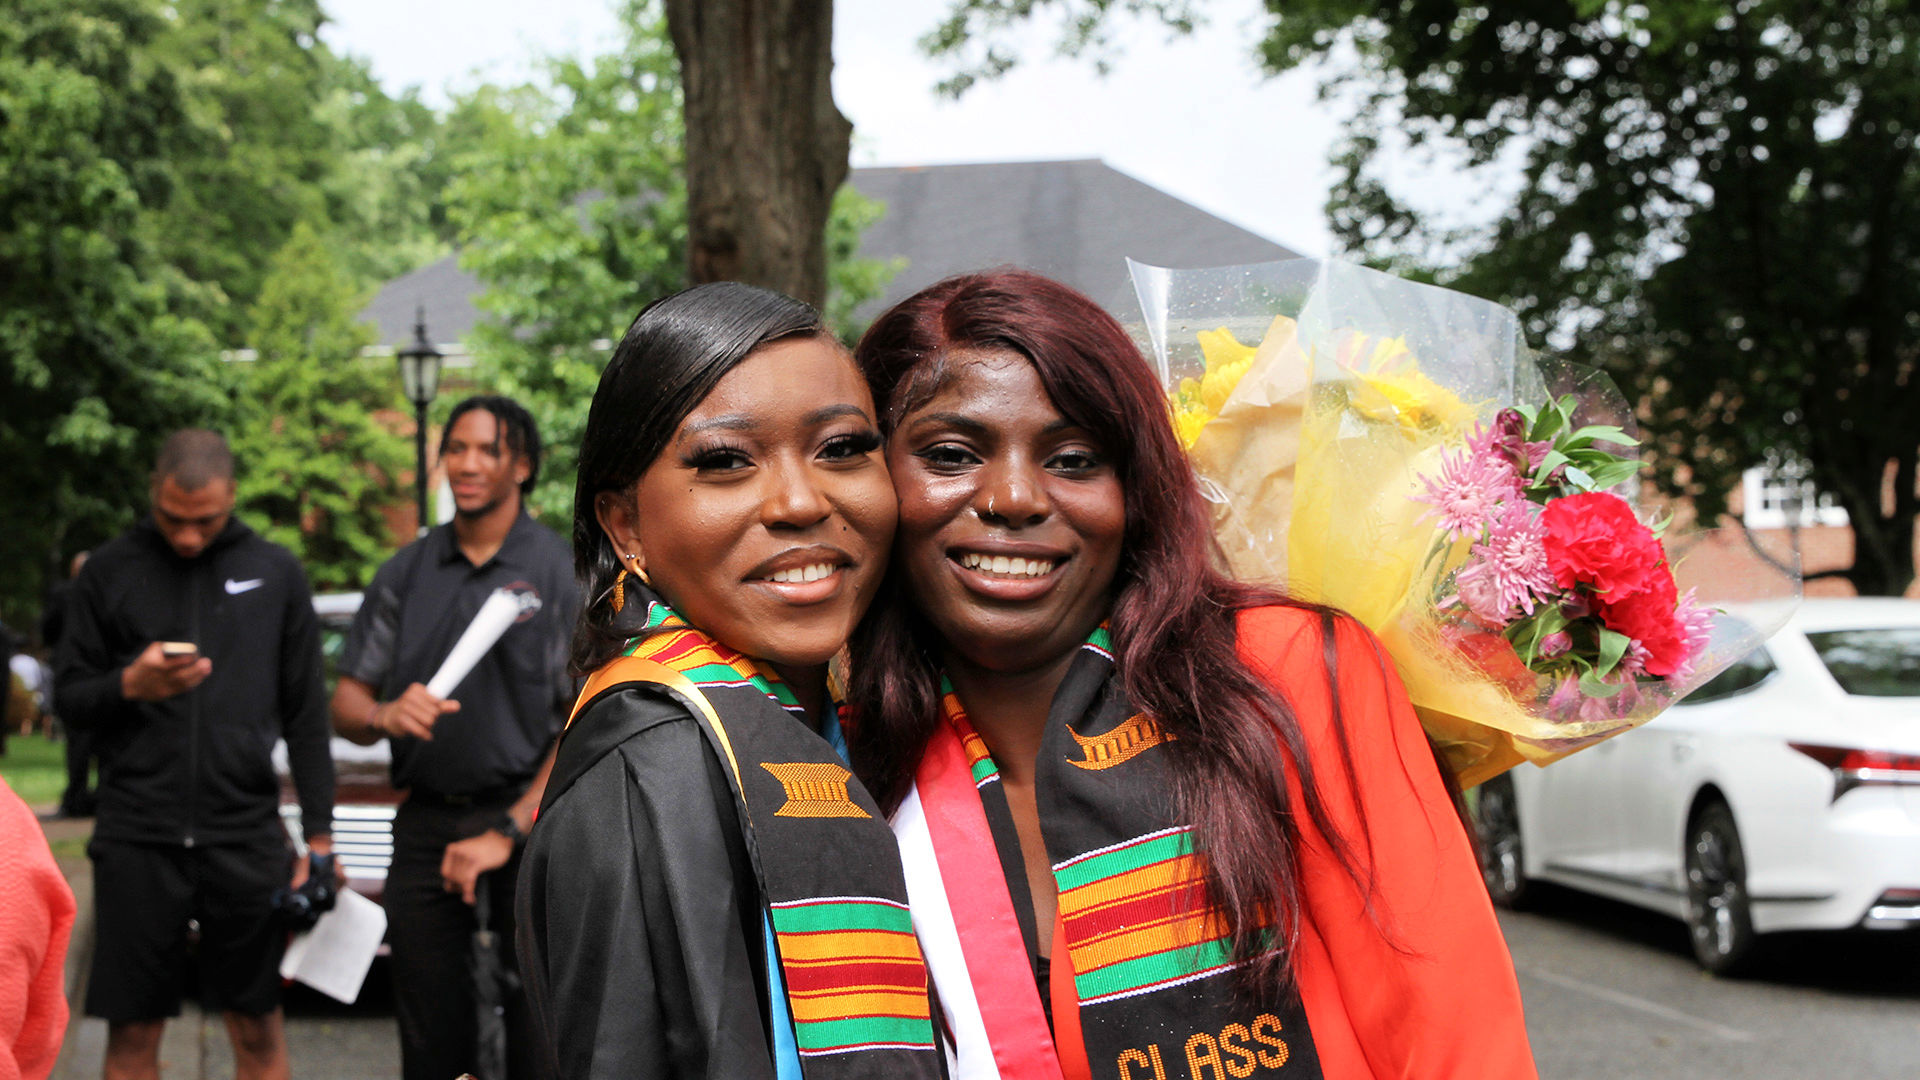 Two smiling graduates take a photo together outdoors after Commencement.